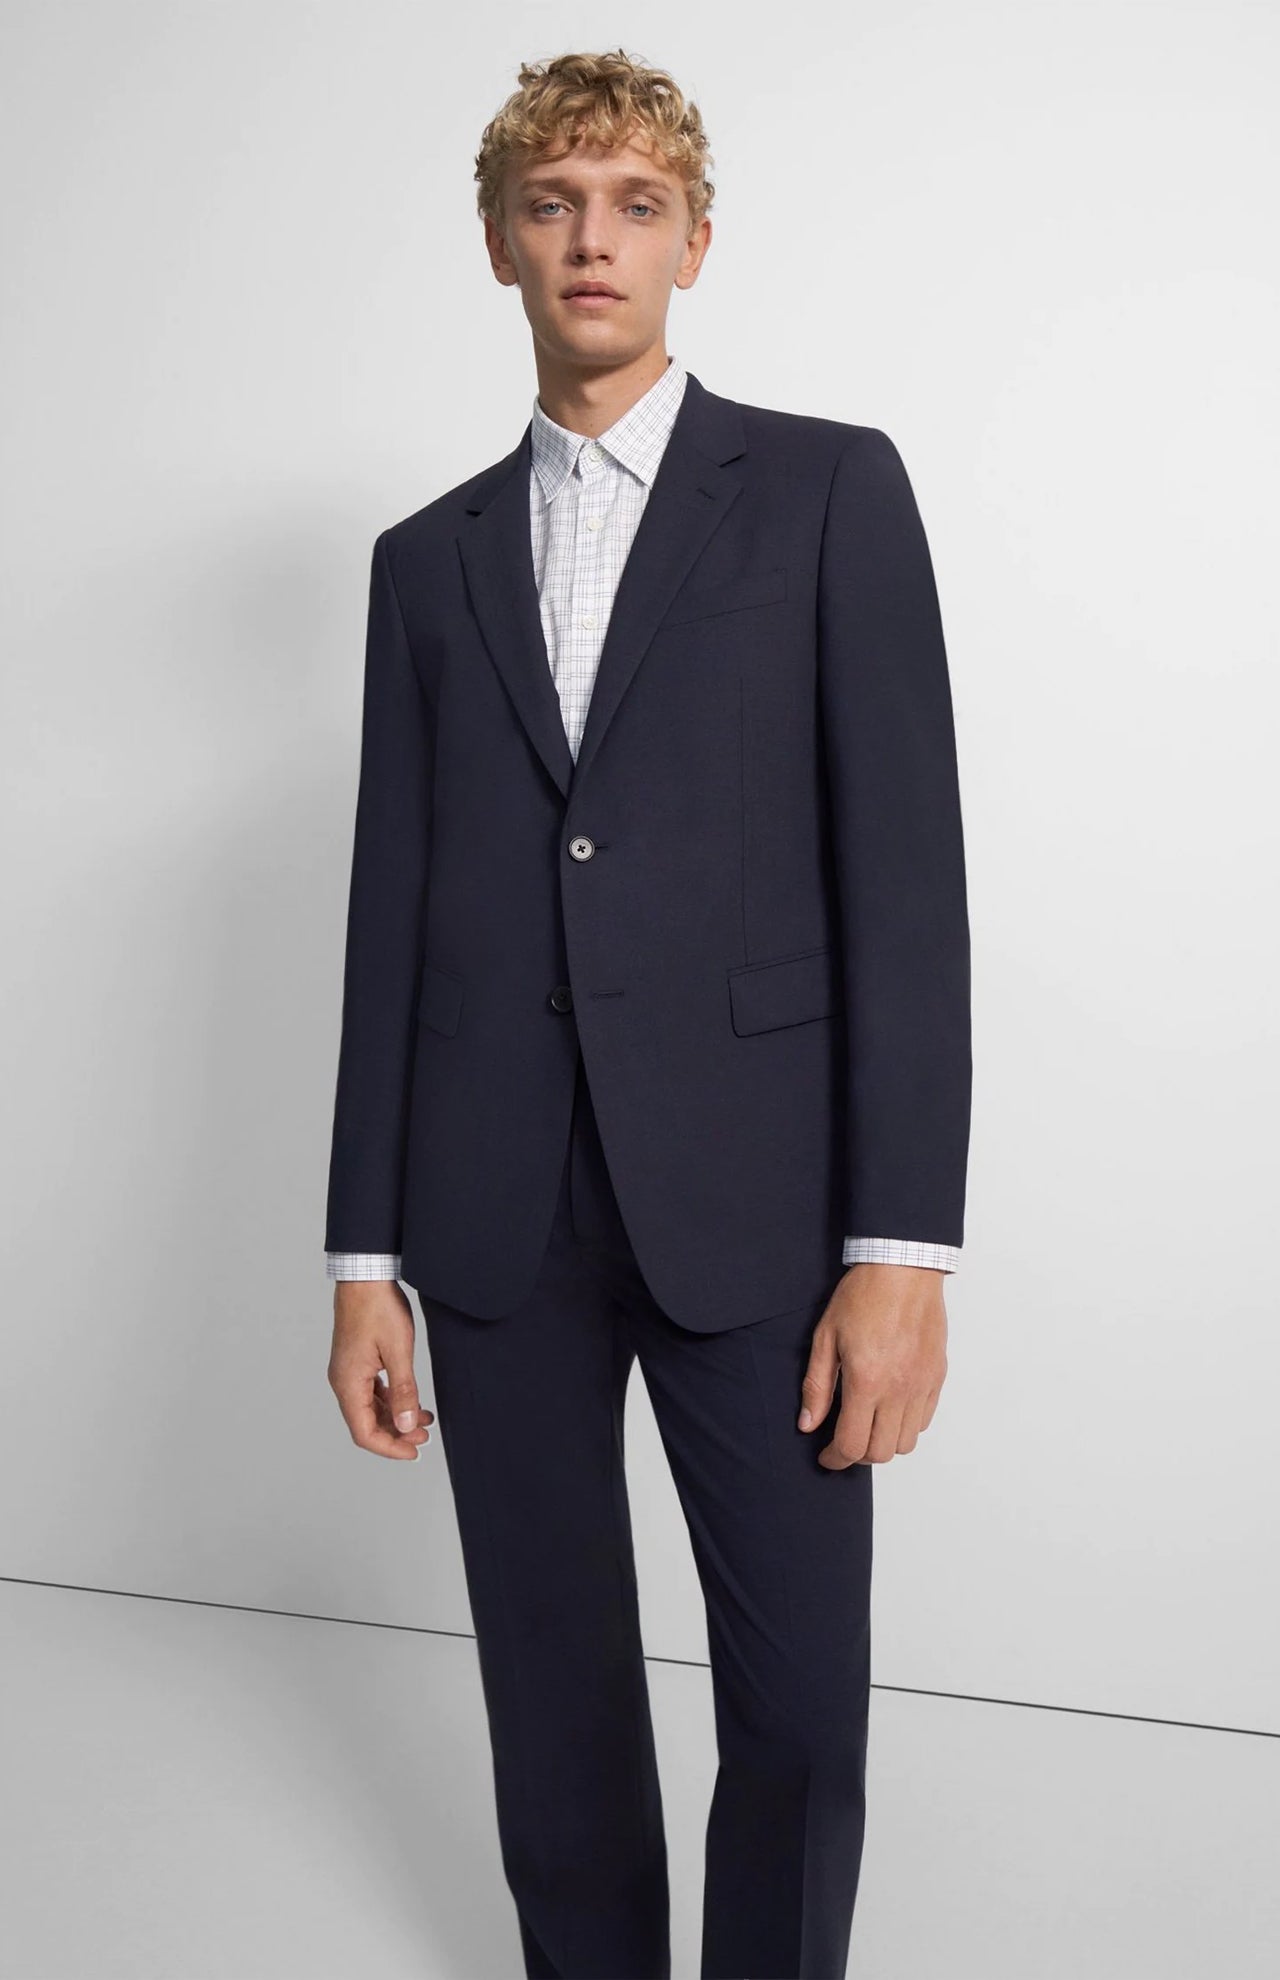 Theory Chambers New Tailor 2 Suit Jacket Navy Front Full Body Model Image (1737077162099)